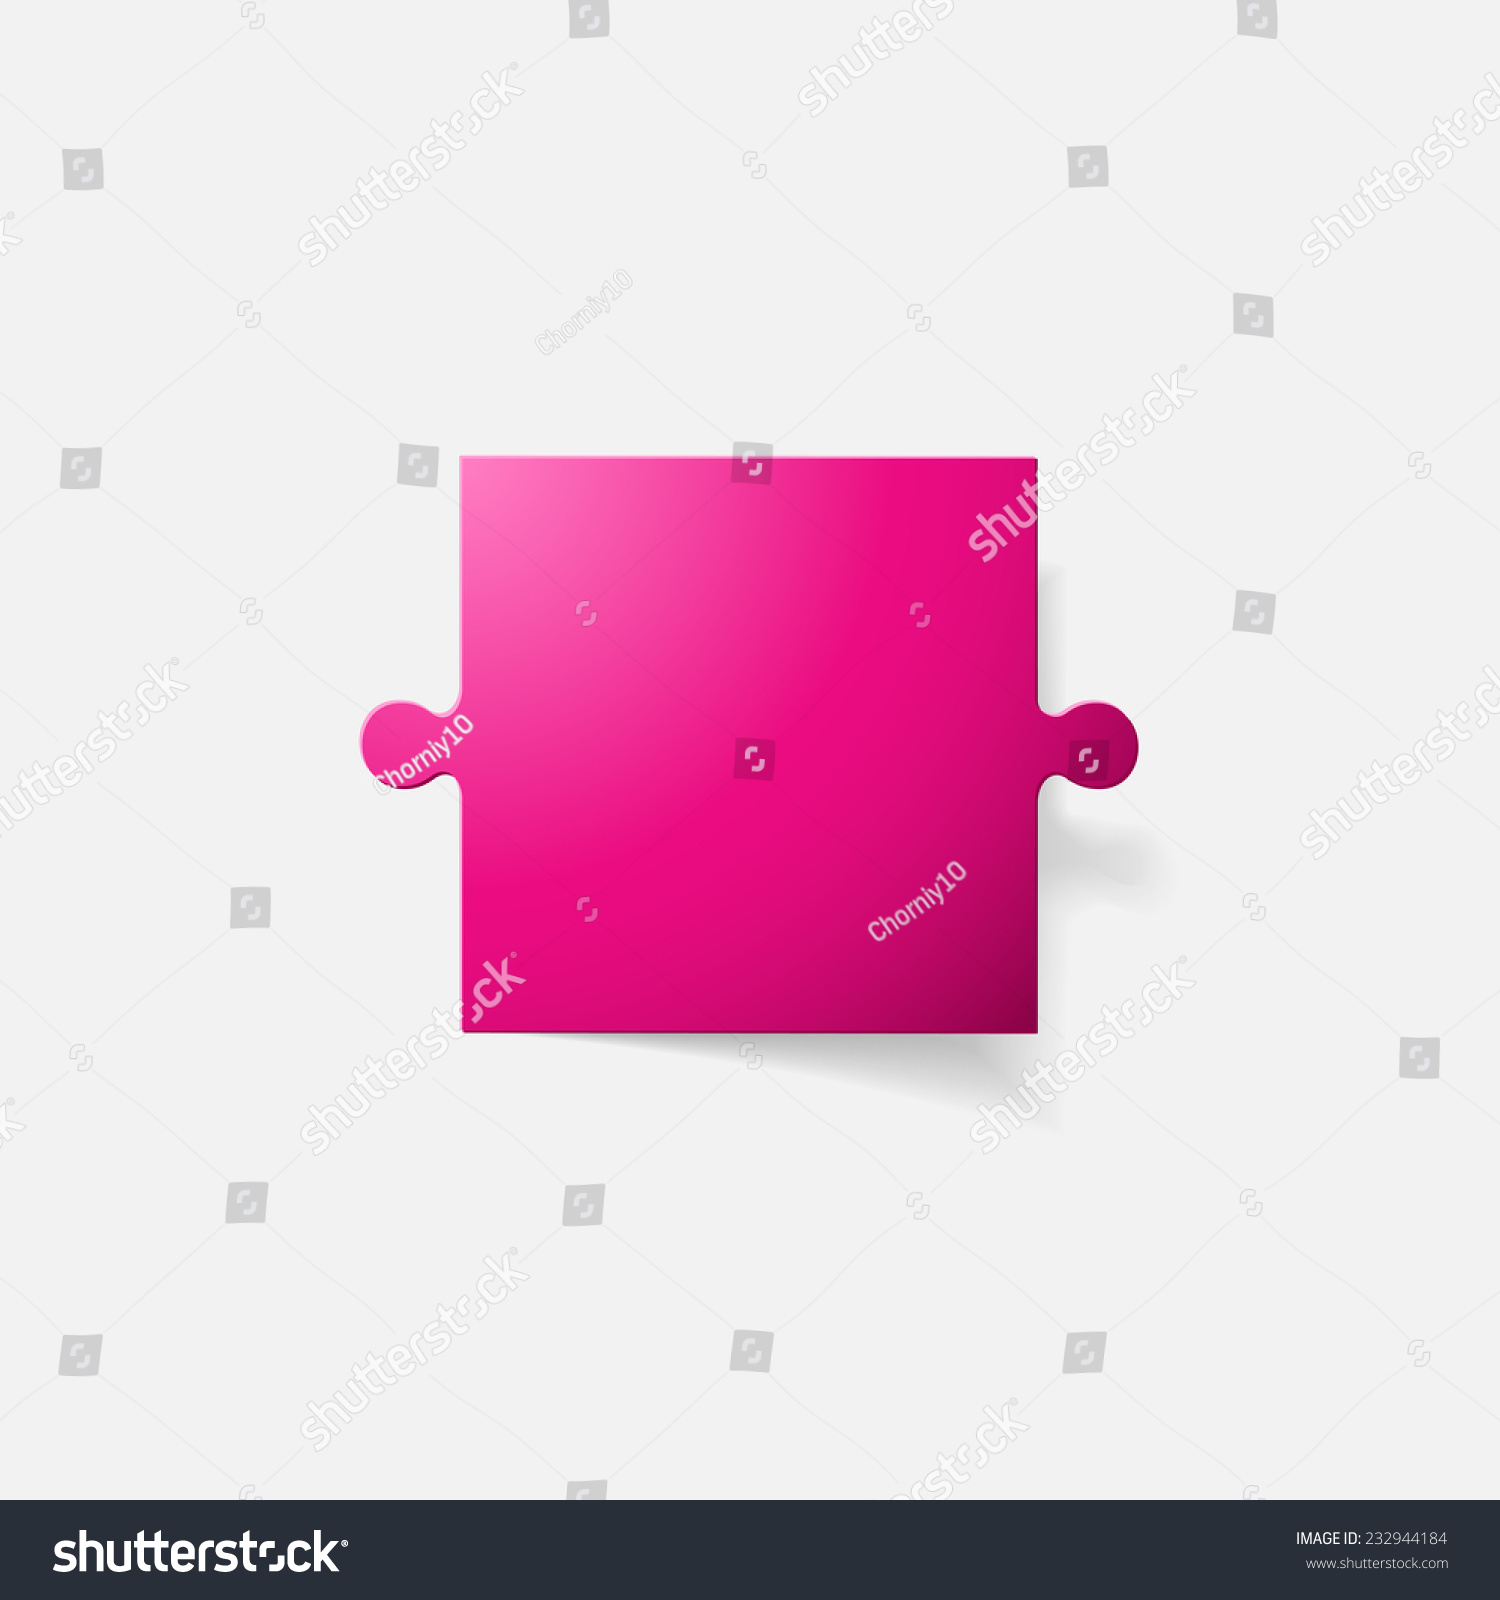 Paper Clipped Sticker Puzzle Isolated Illustration Stock ...